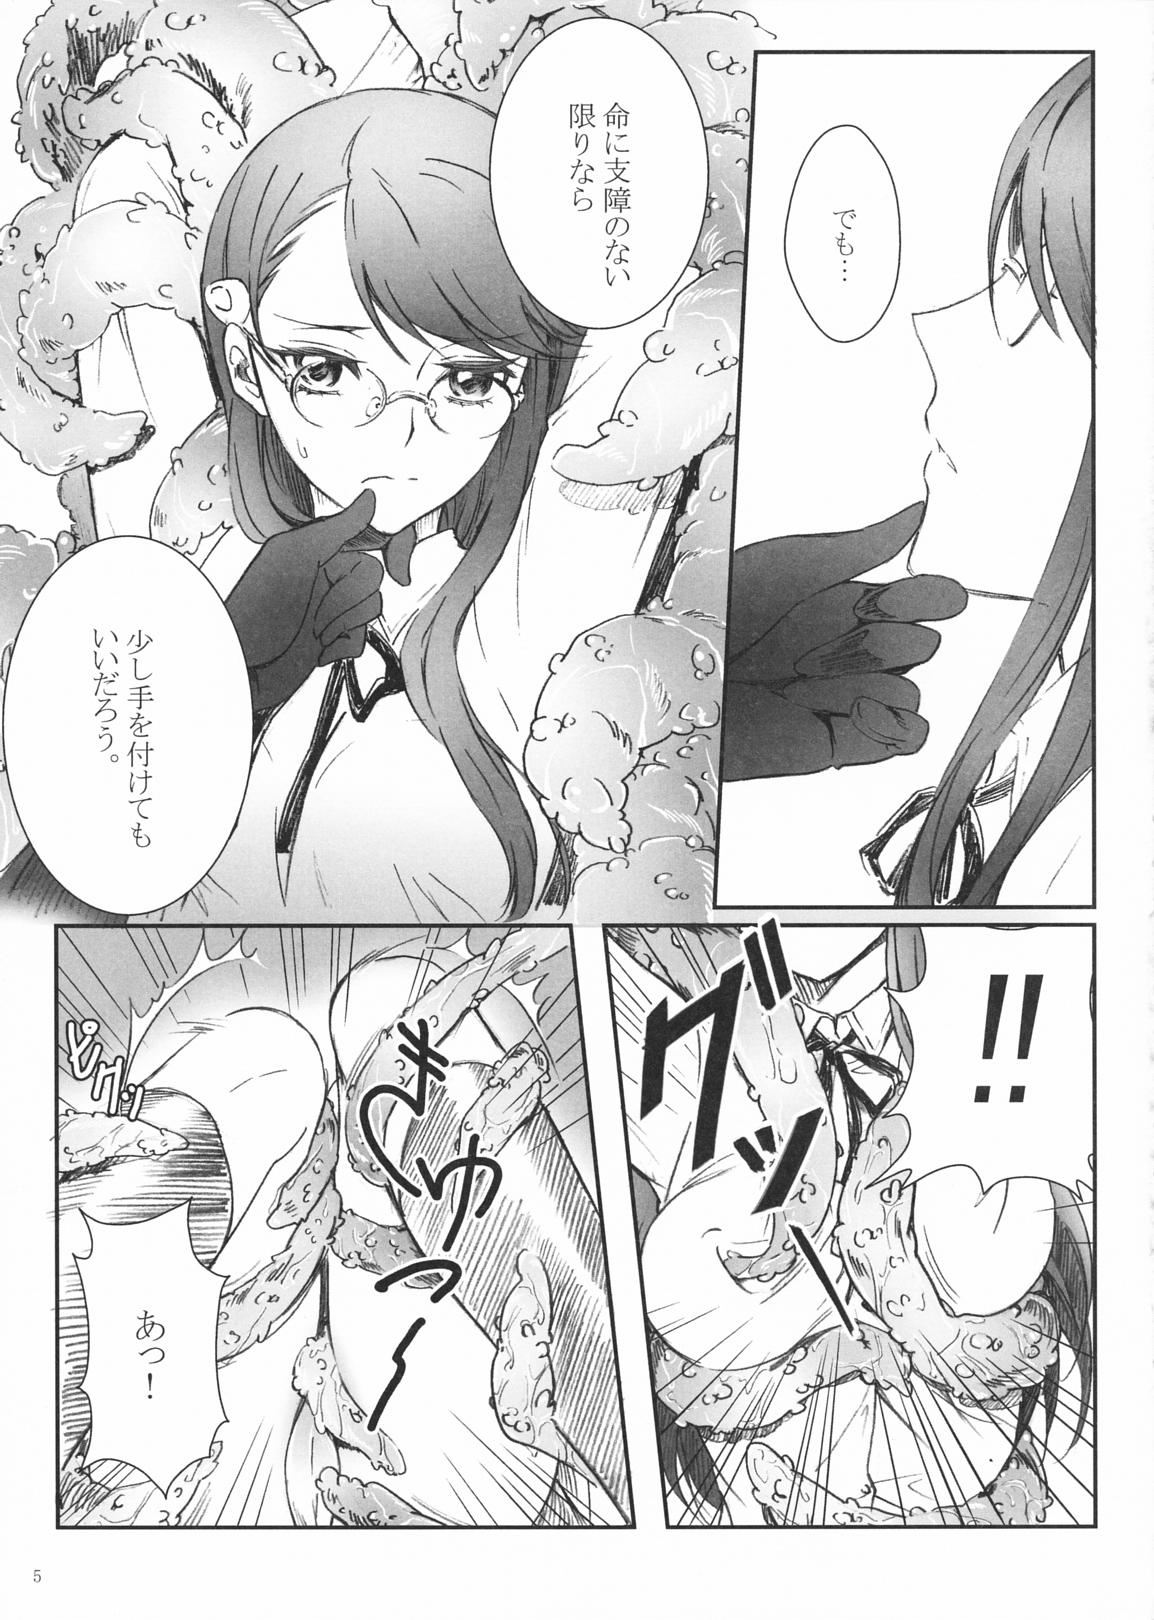 Young Petite Porn Eclipse of the MooN - Heartcatch precure Australian - Page 7